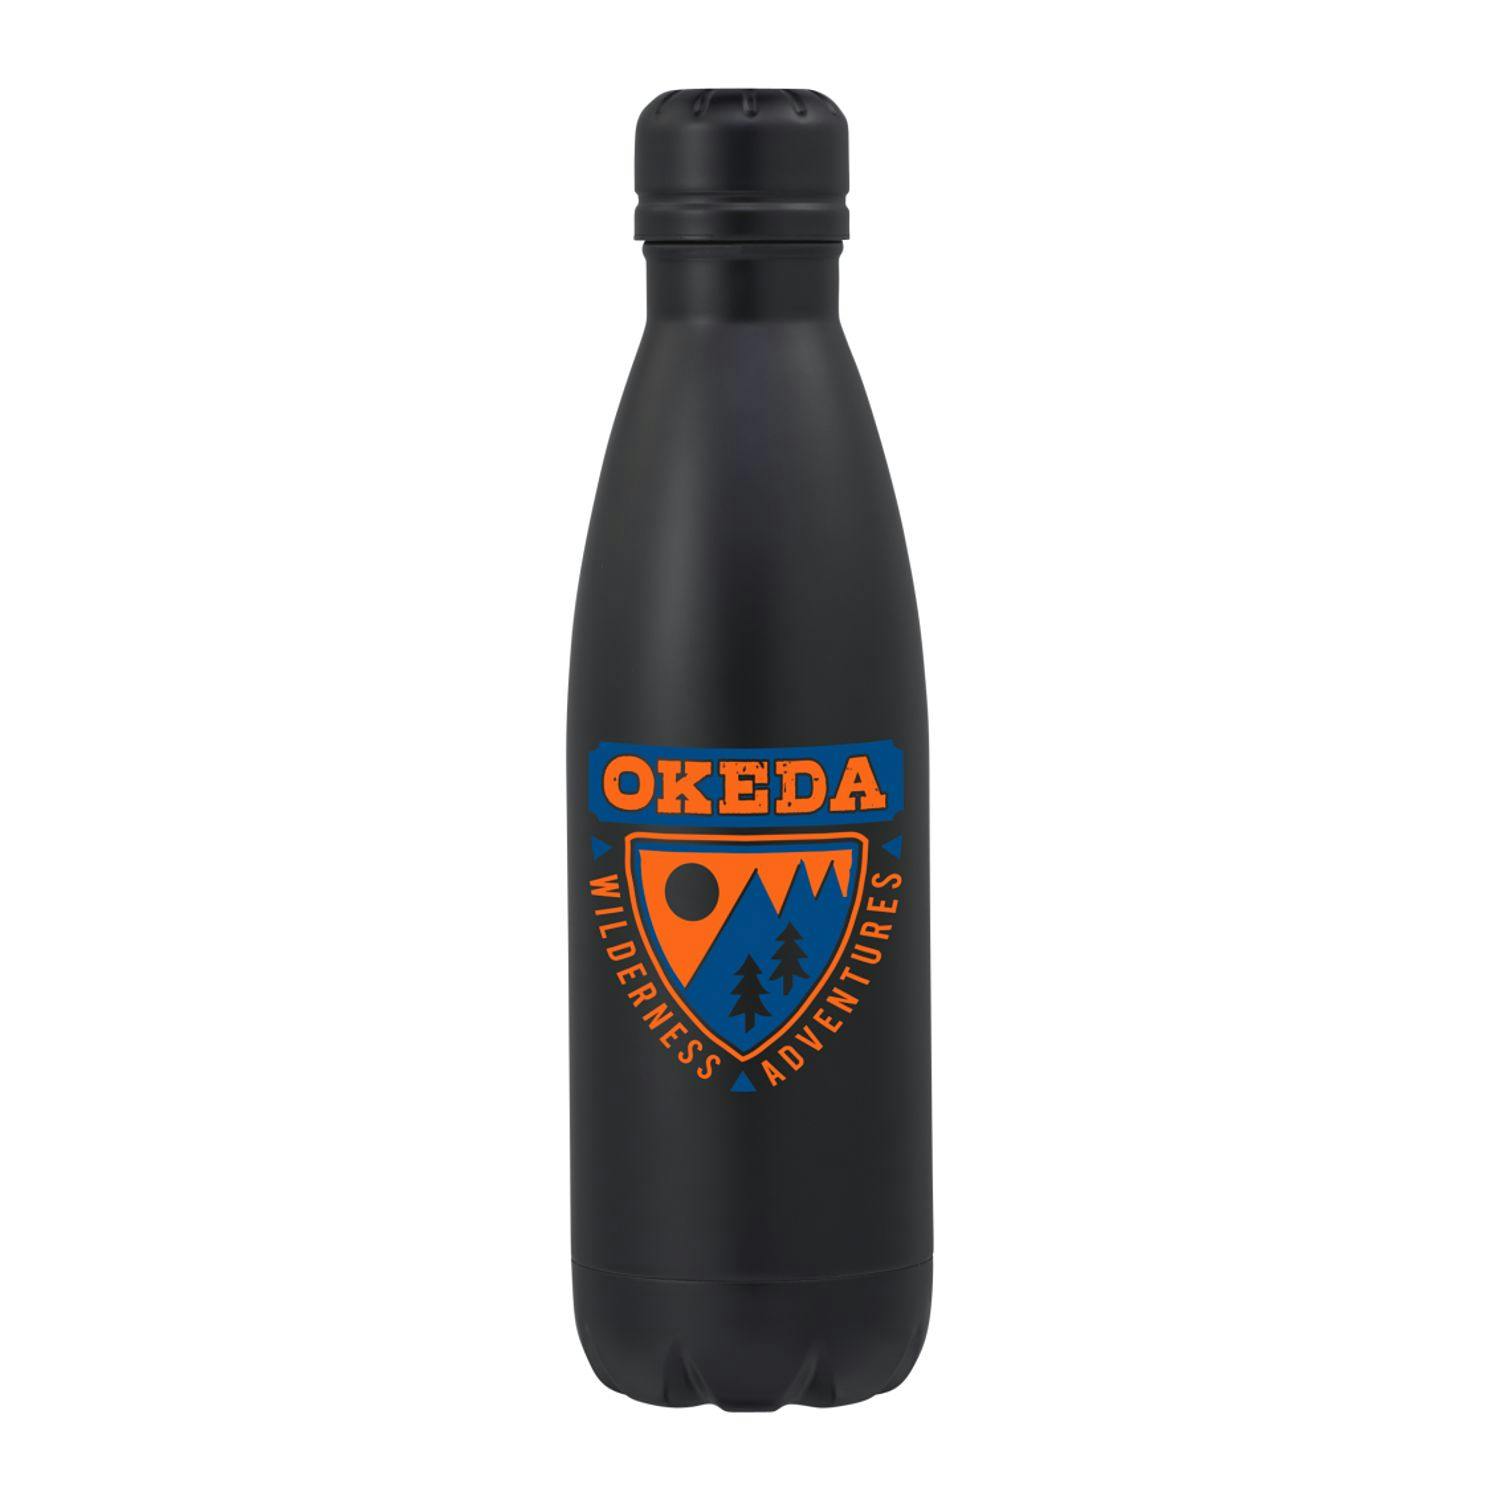 Copper Vacuum Insulated Bottle 17oz - additional Image 1